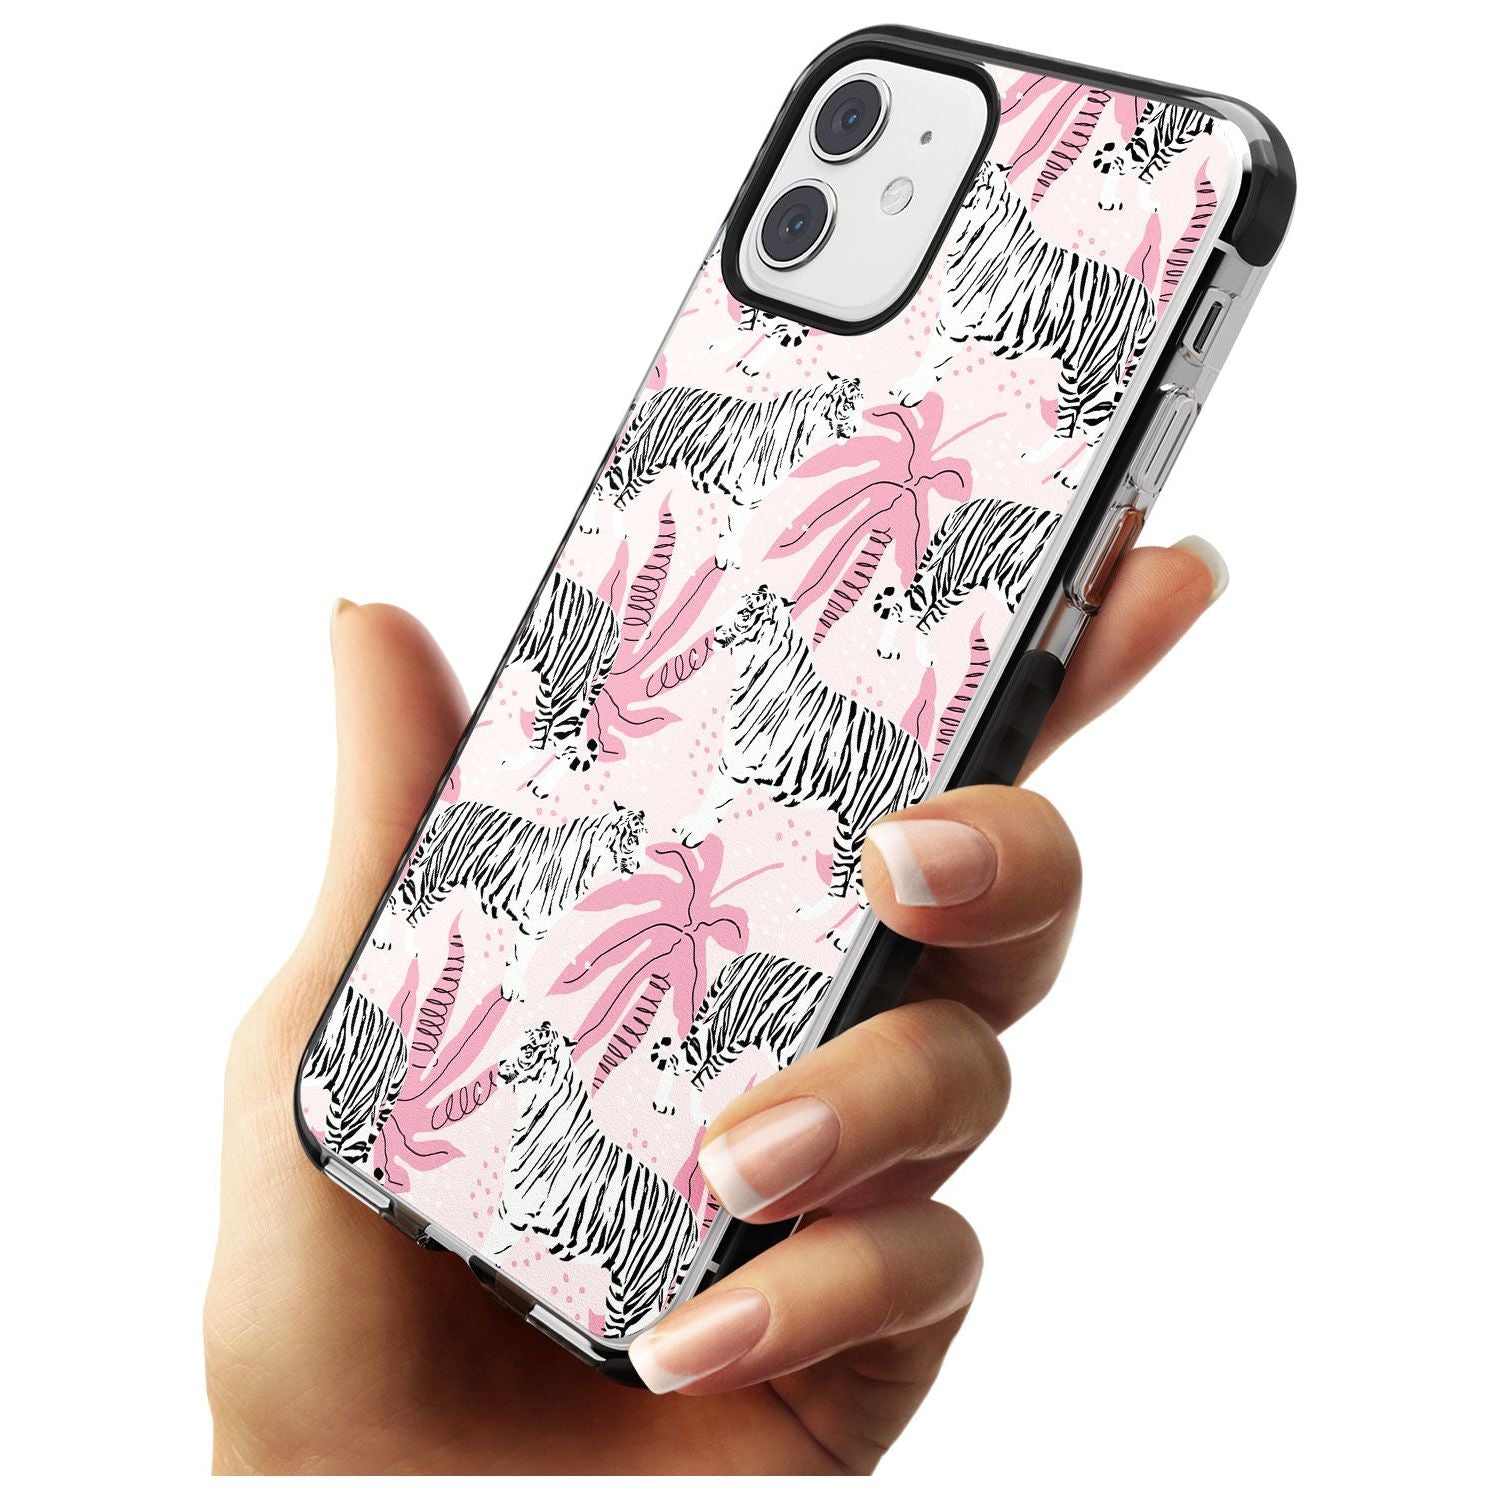 White Tigers on Pink Pattern Black Impact Phone Case for iPhone 11